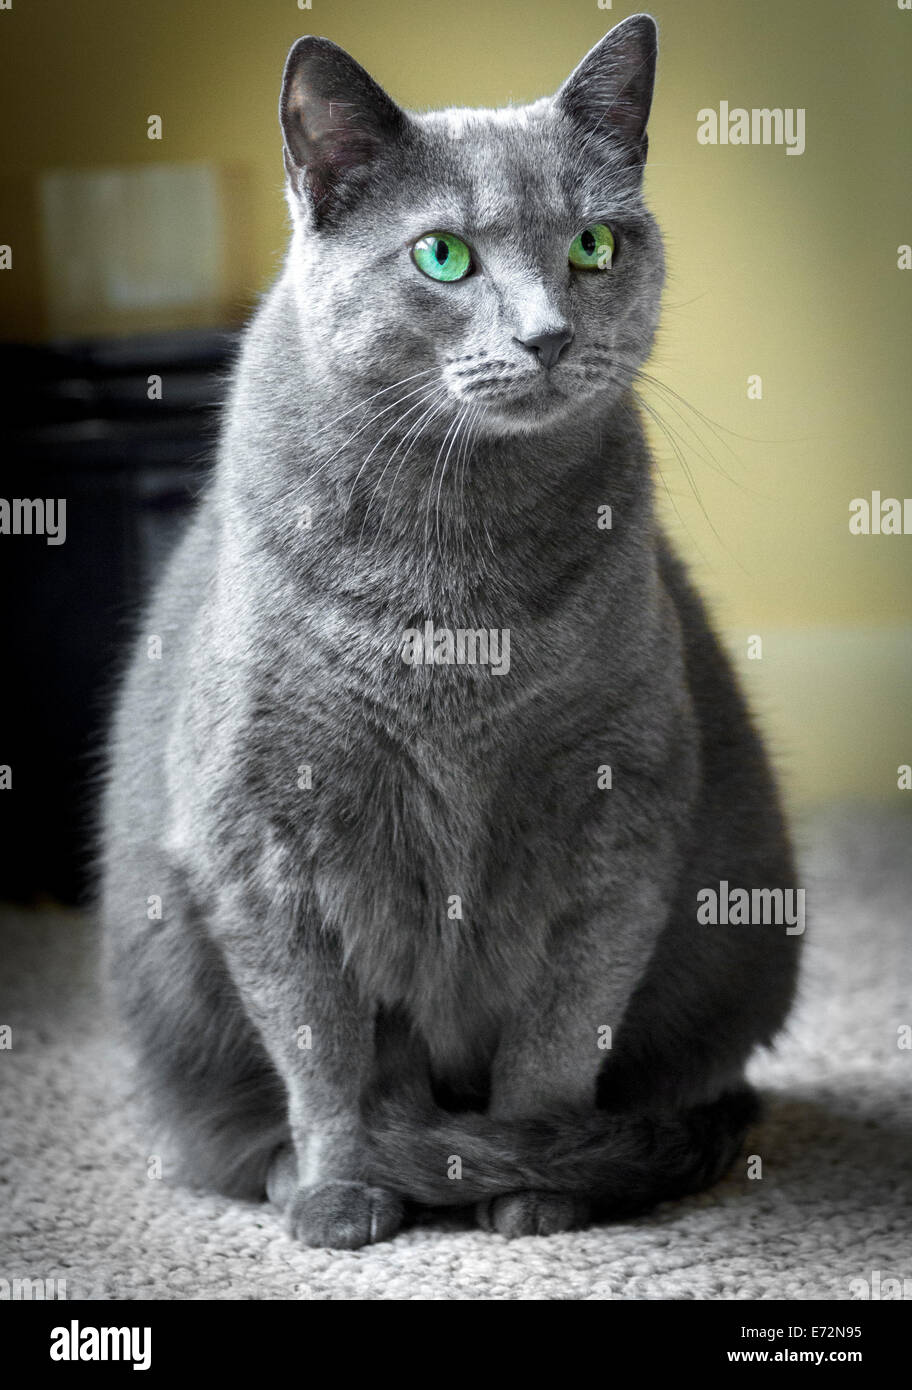 Portrait of a Russian Blue cat with teal green eyes, posing indoors with its tail wrapped around its legs. Stock Photo